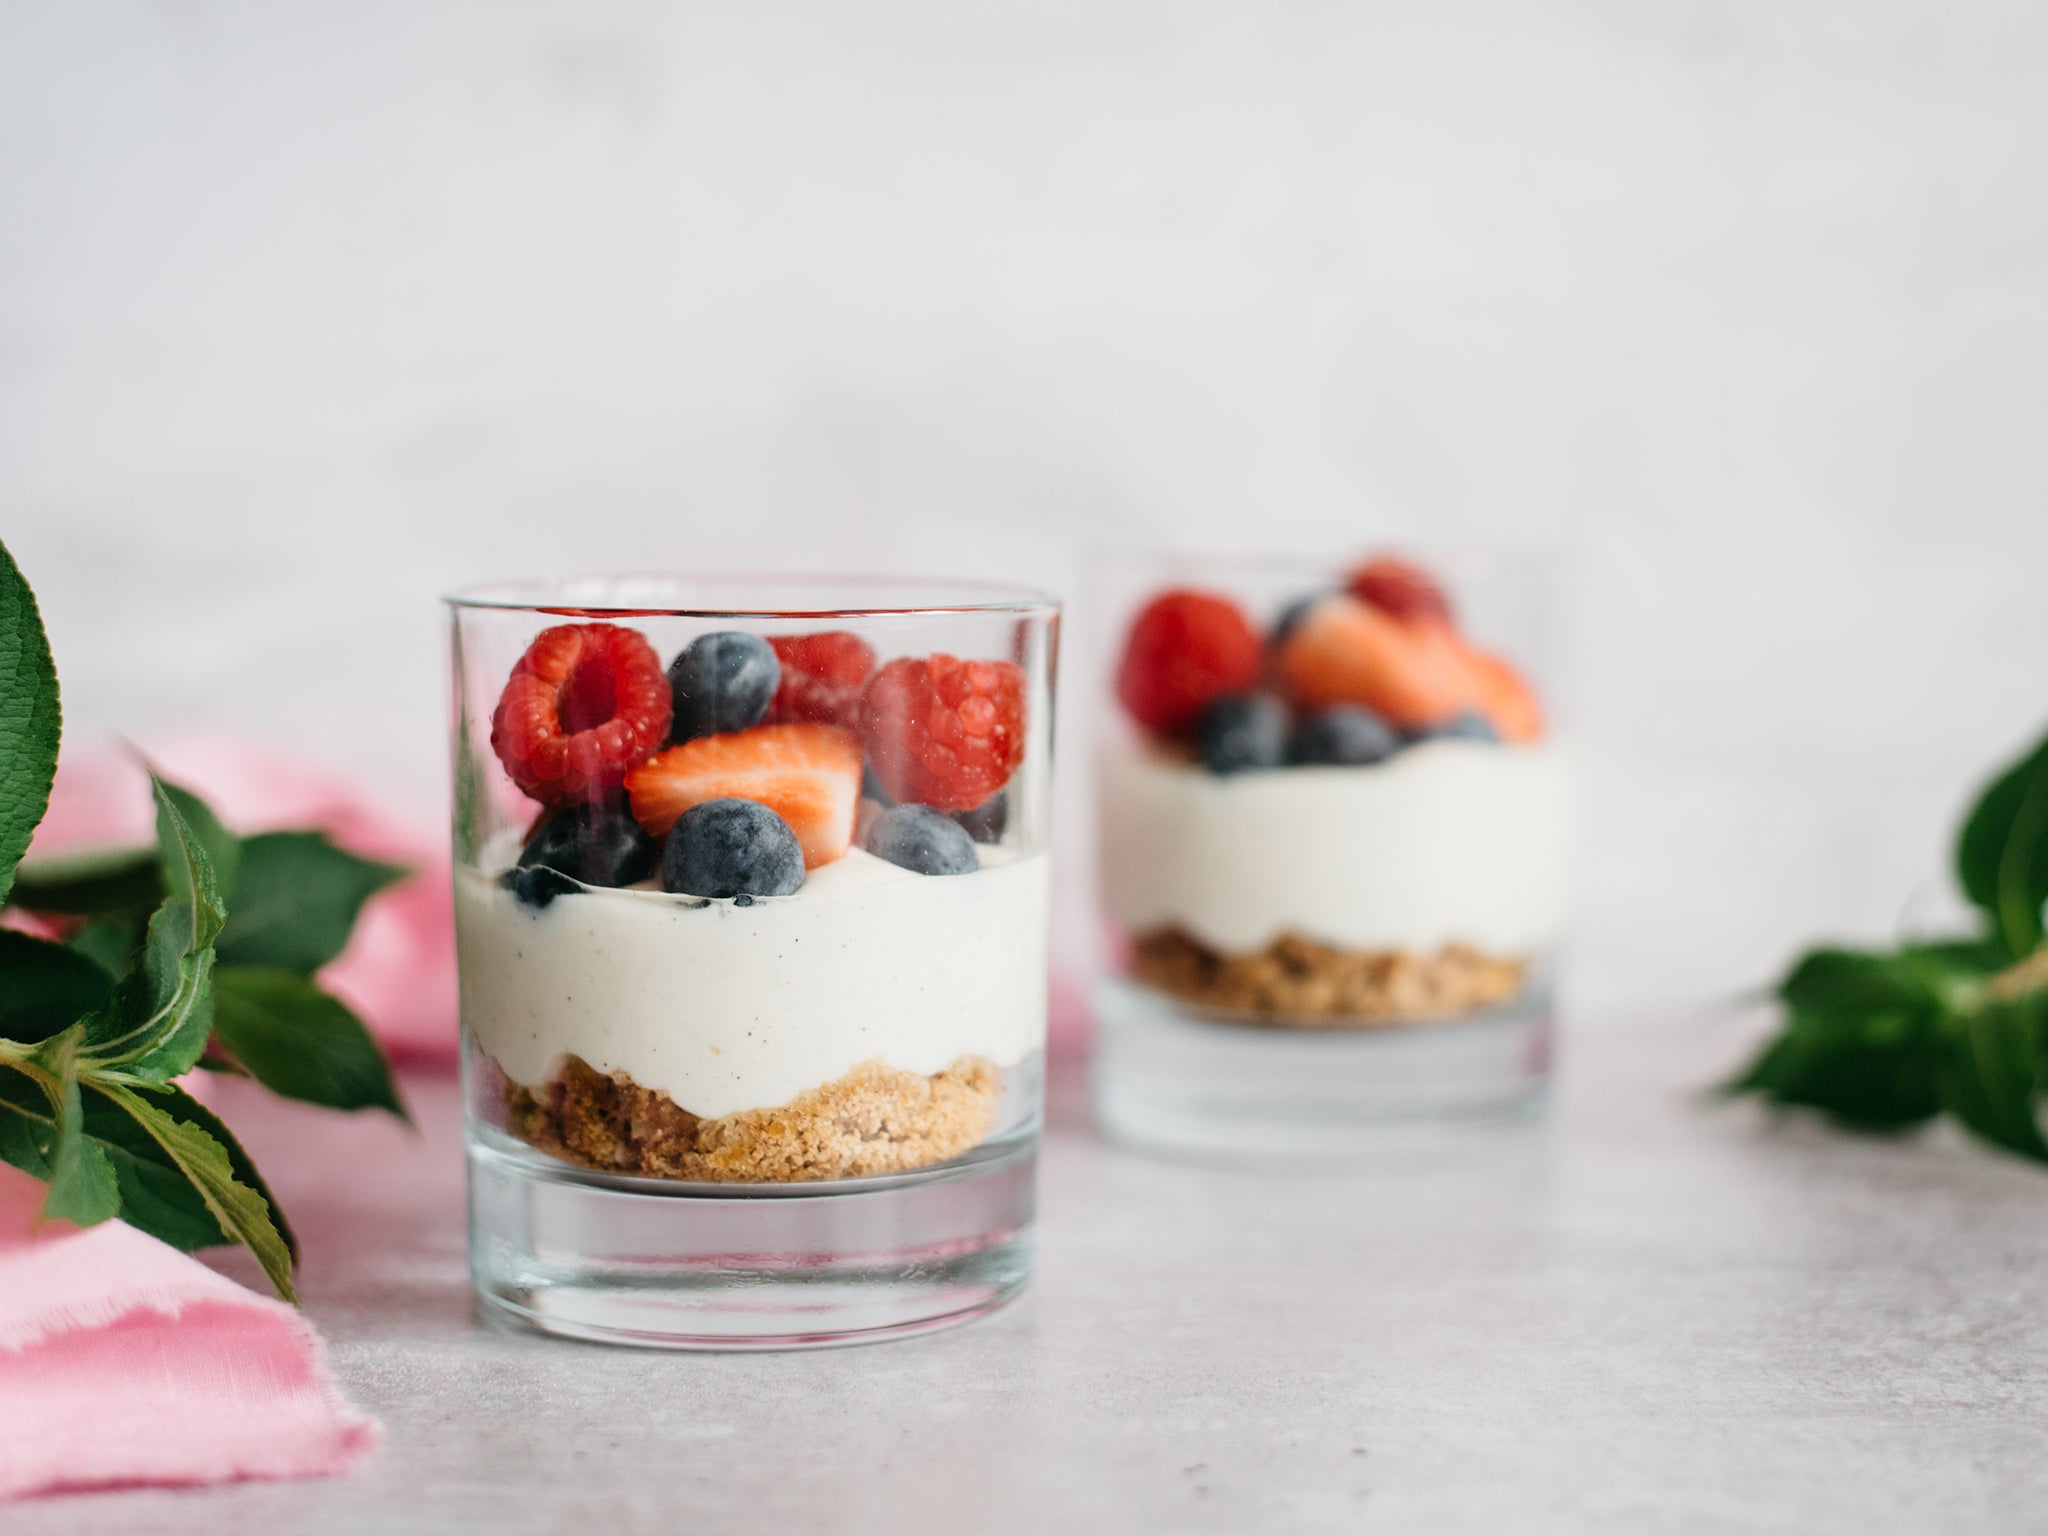 A no bake cheesecake that for minimal effort delivers maximum taste